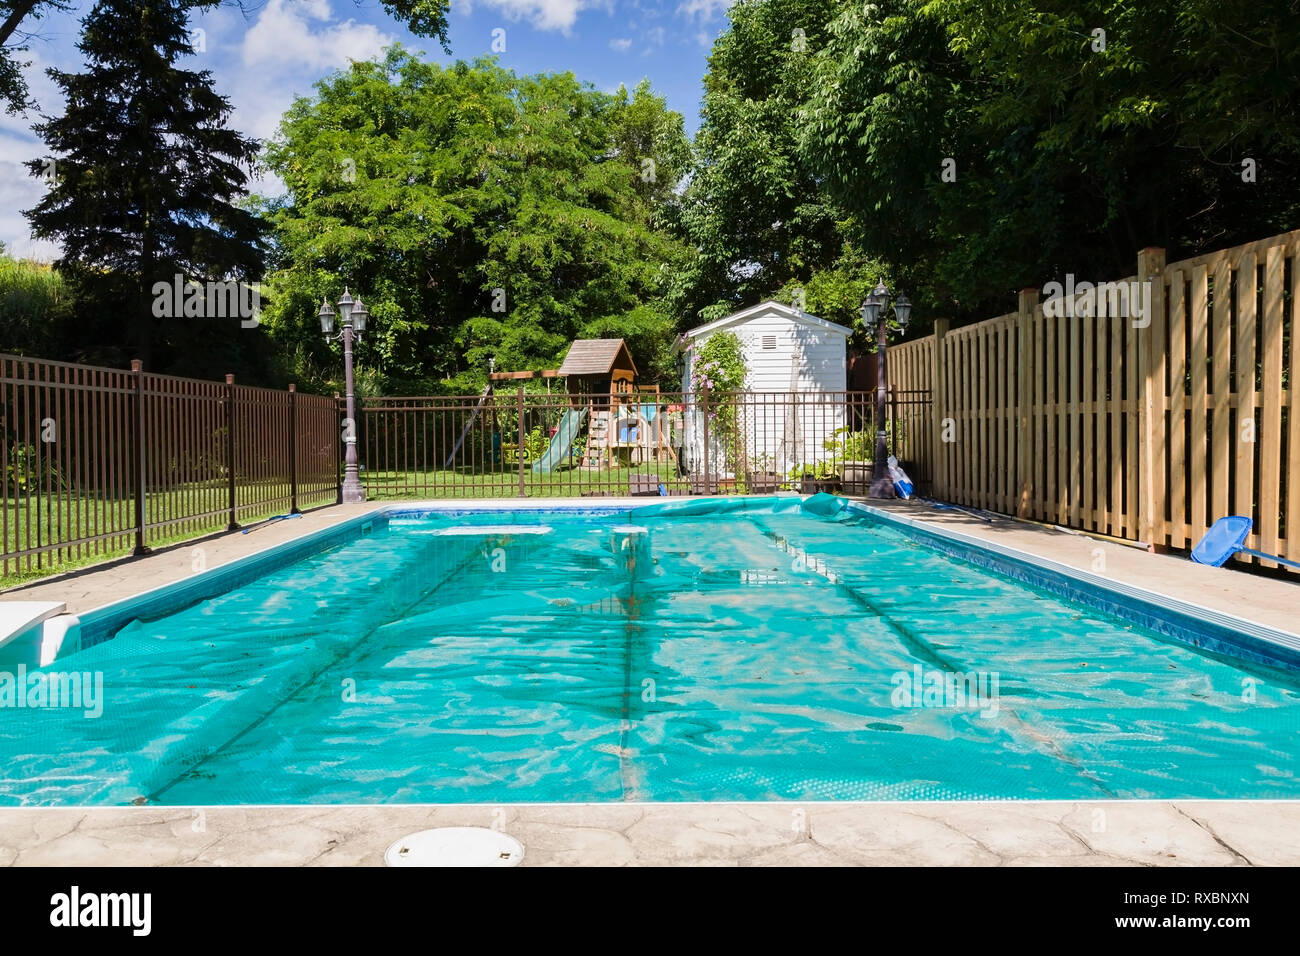 In-ground rectangular swimming pool with protective green vinyl leaf cover enclosed by brown aluminium and wooden security fences in residential backyard in summer, Quebec, Canada. This image is property released. CUPR0329 Stock Photo